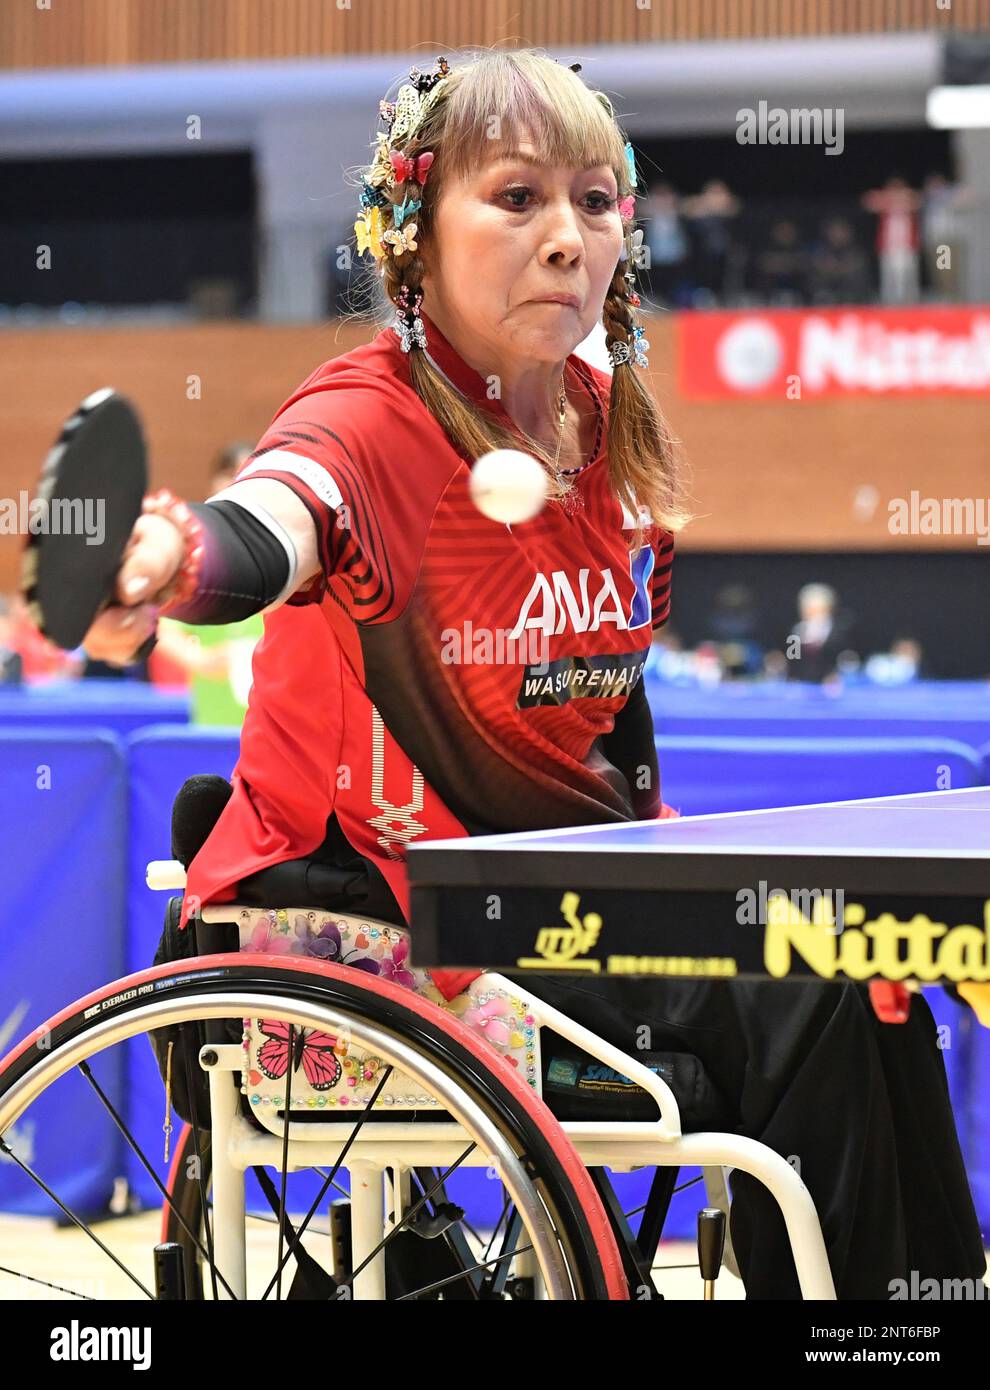 Kimie Bessho, a Japanese Paralympic table tennis player, hits a shot during  ITTF PTT Japan Open 2019 Tokyo in Minato Ward, Tokyo on August 1, 2019.  71-year-old Bessho placed 5th in the